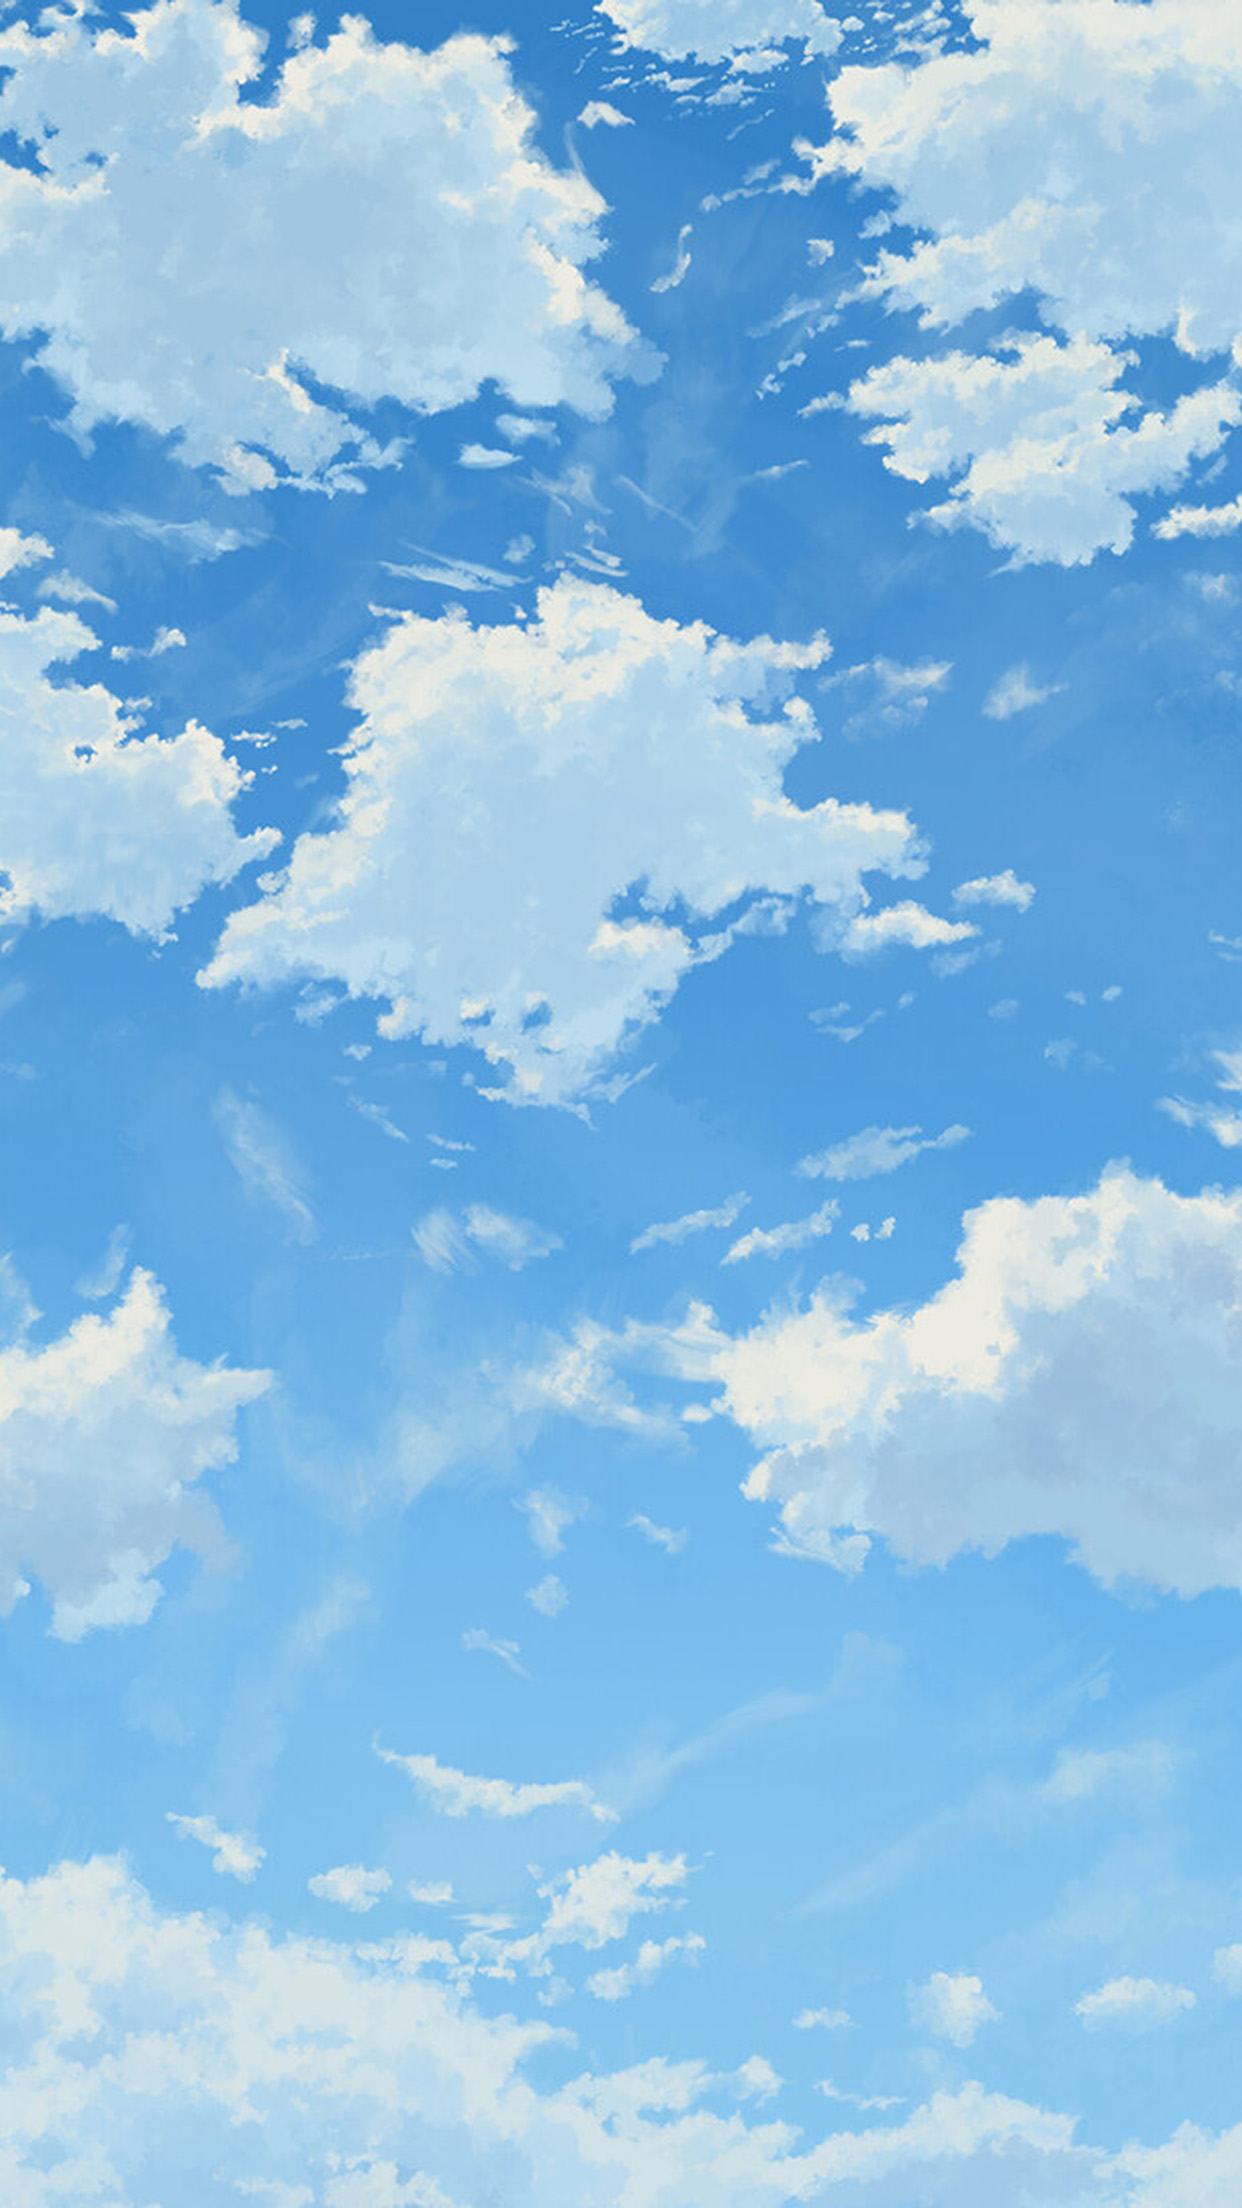 Details more than 81 sky anime background best - in.duhocakina